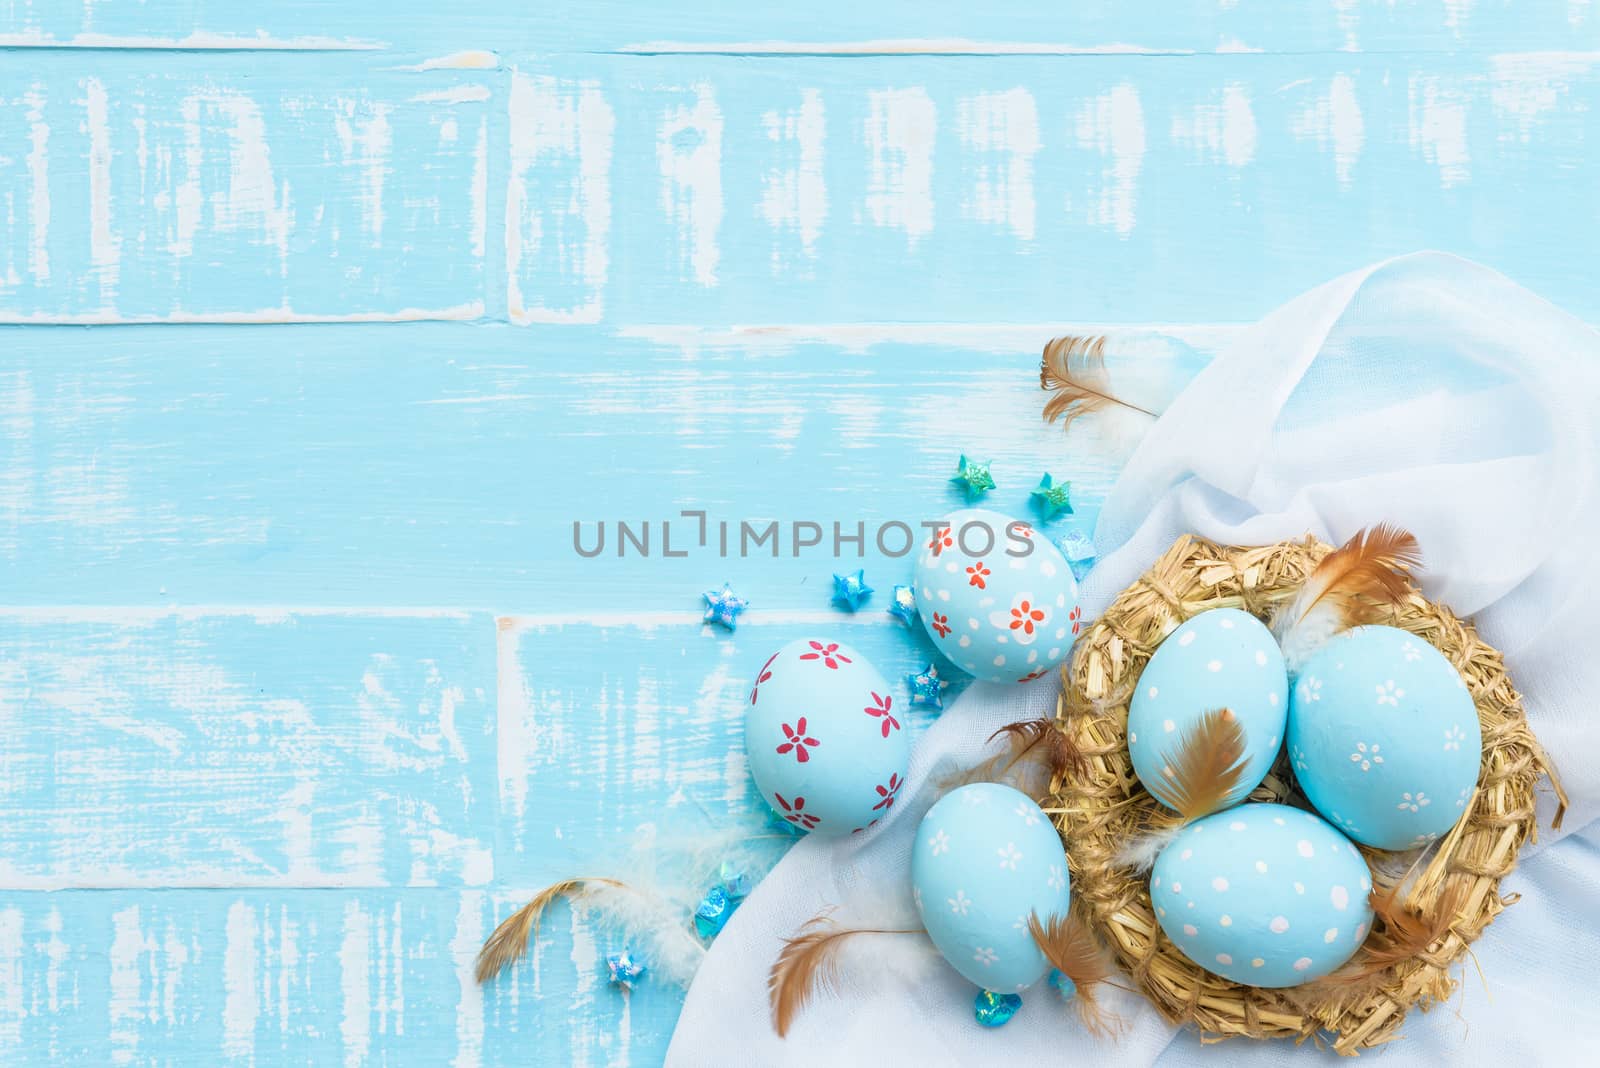 Happy easter! Colorful of Easter eggs in nest with paper star, f by spukkato